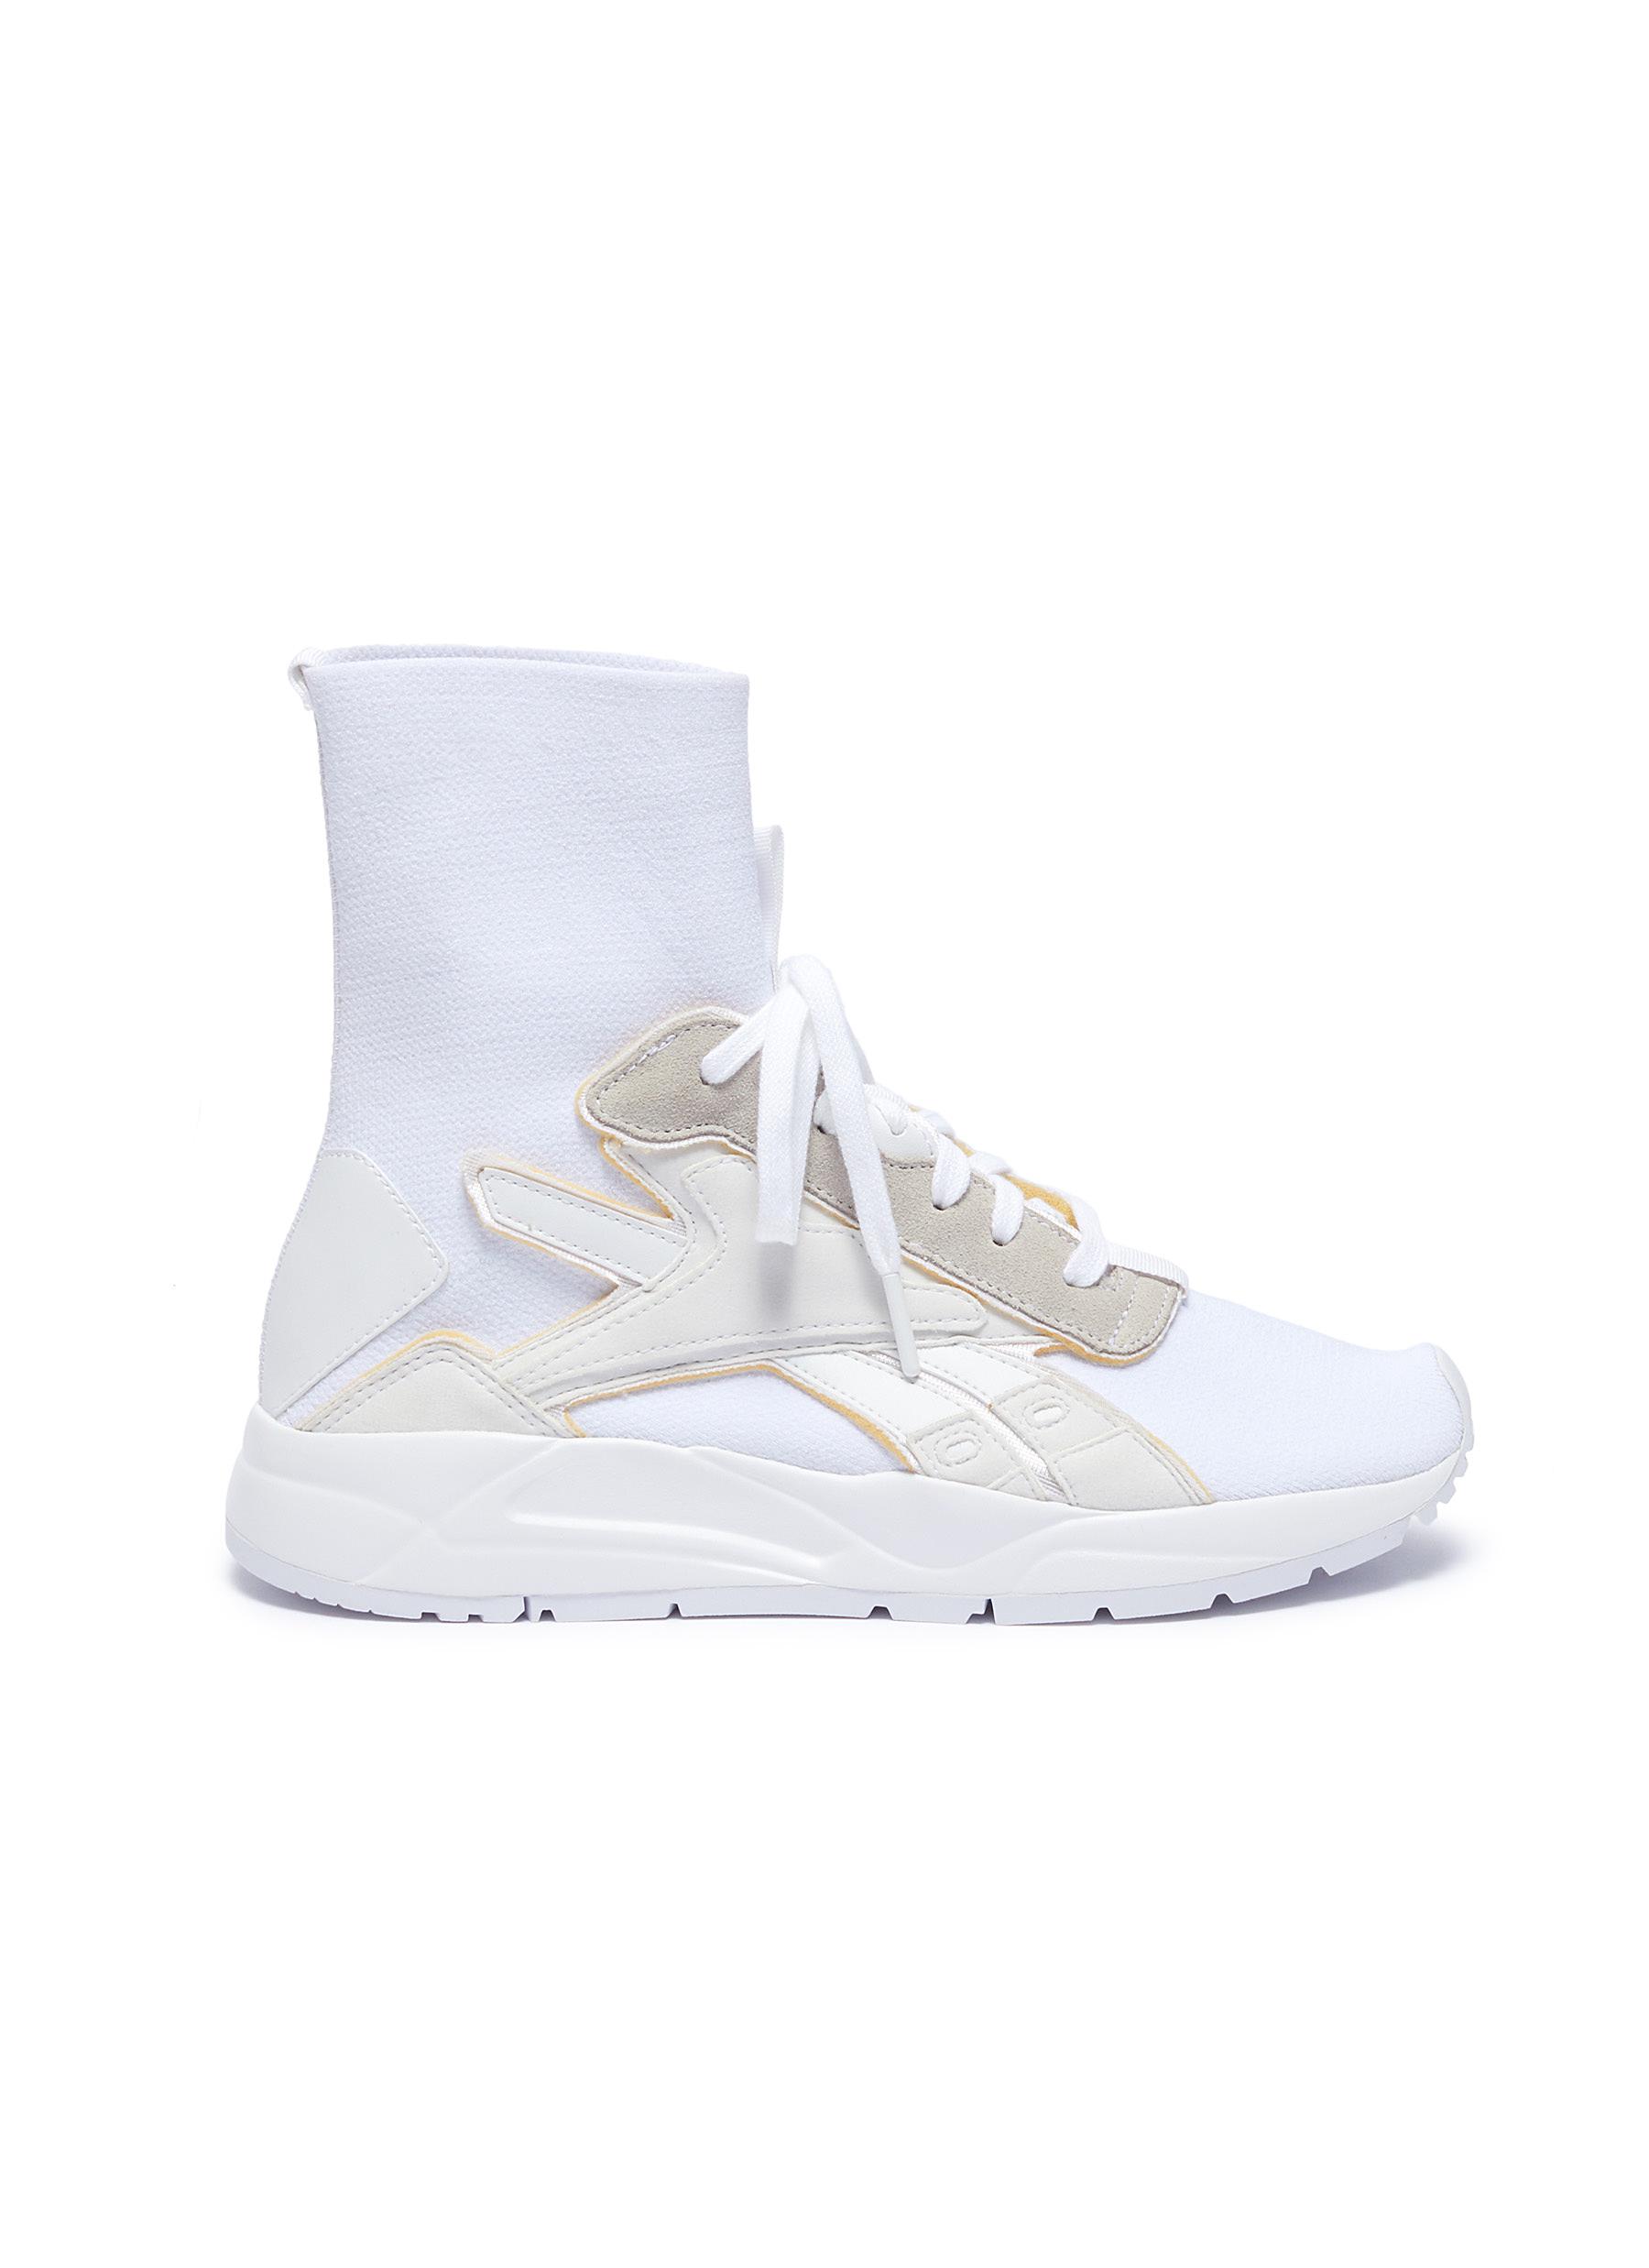 Bolton panelled sock sneakers by Victoria Beckham